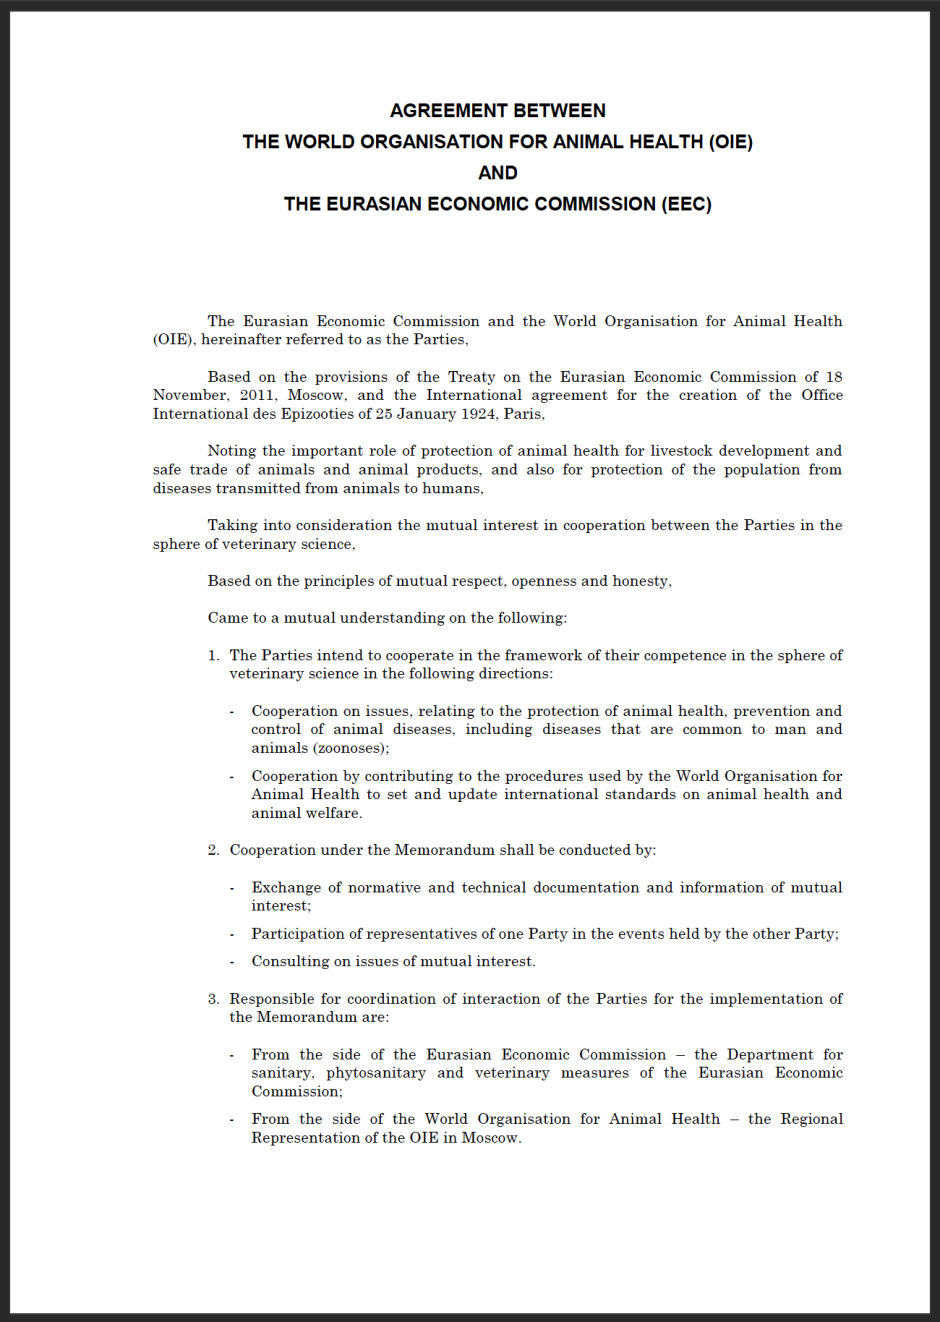 Agreement with the Eurasian Economic Commission (EEC)